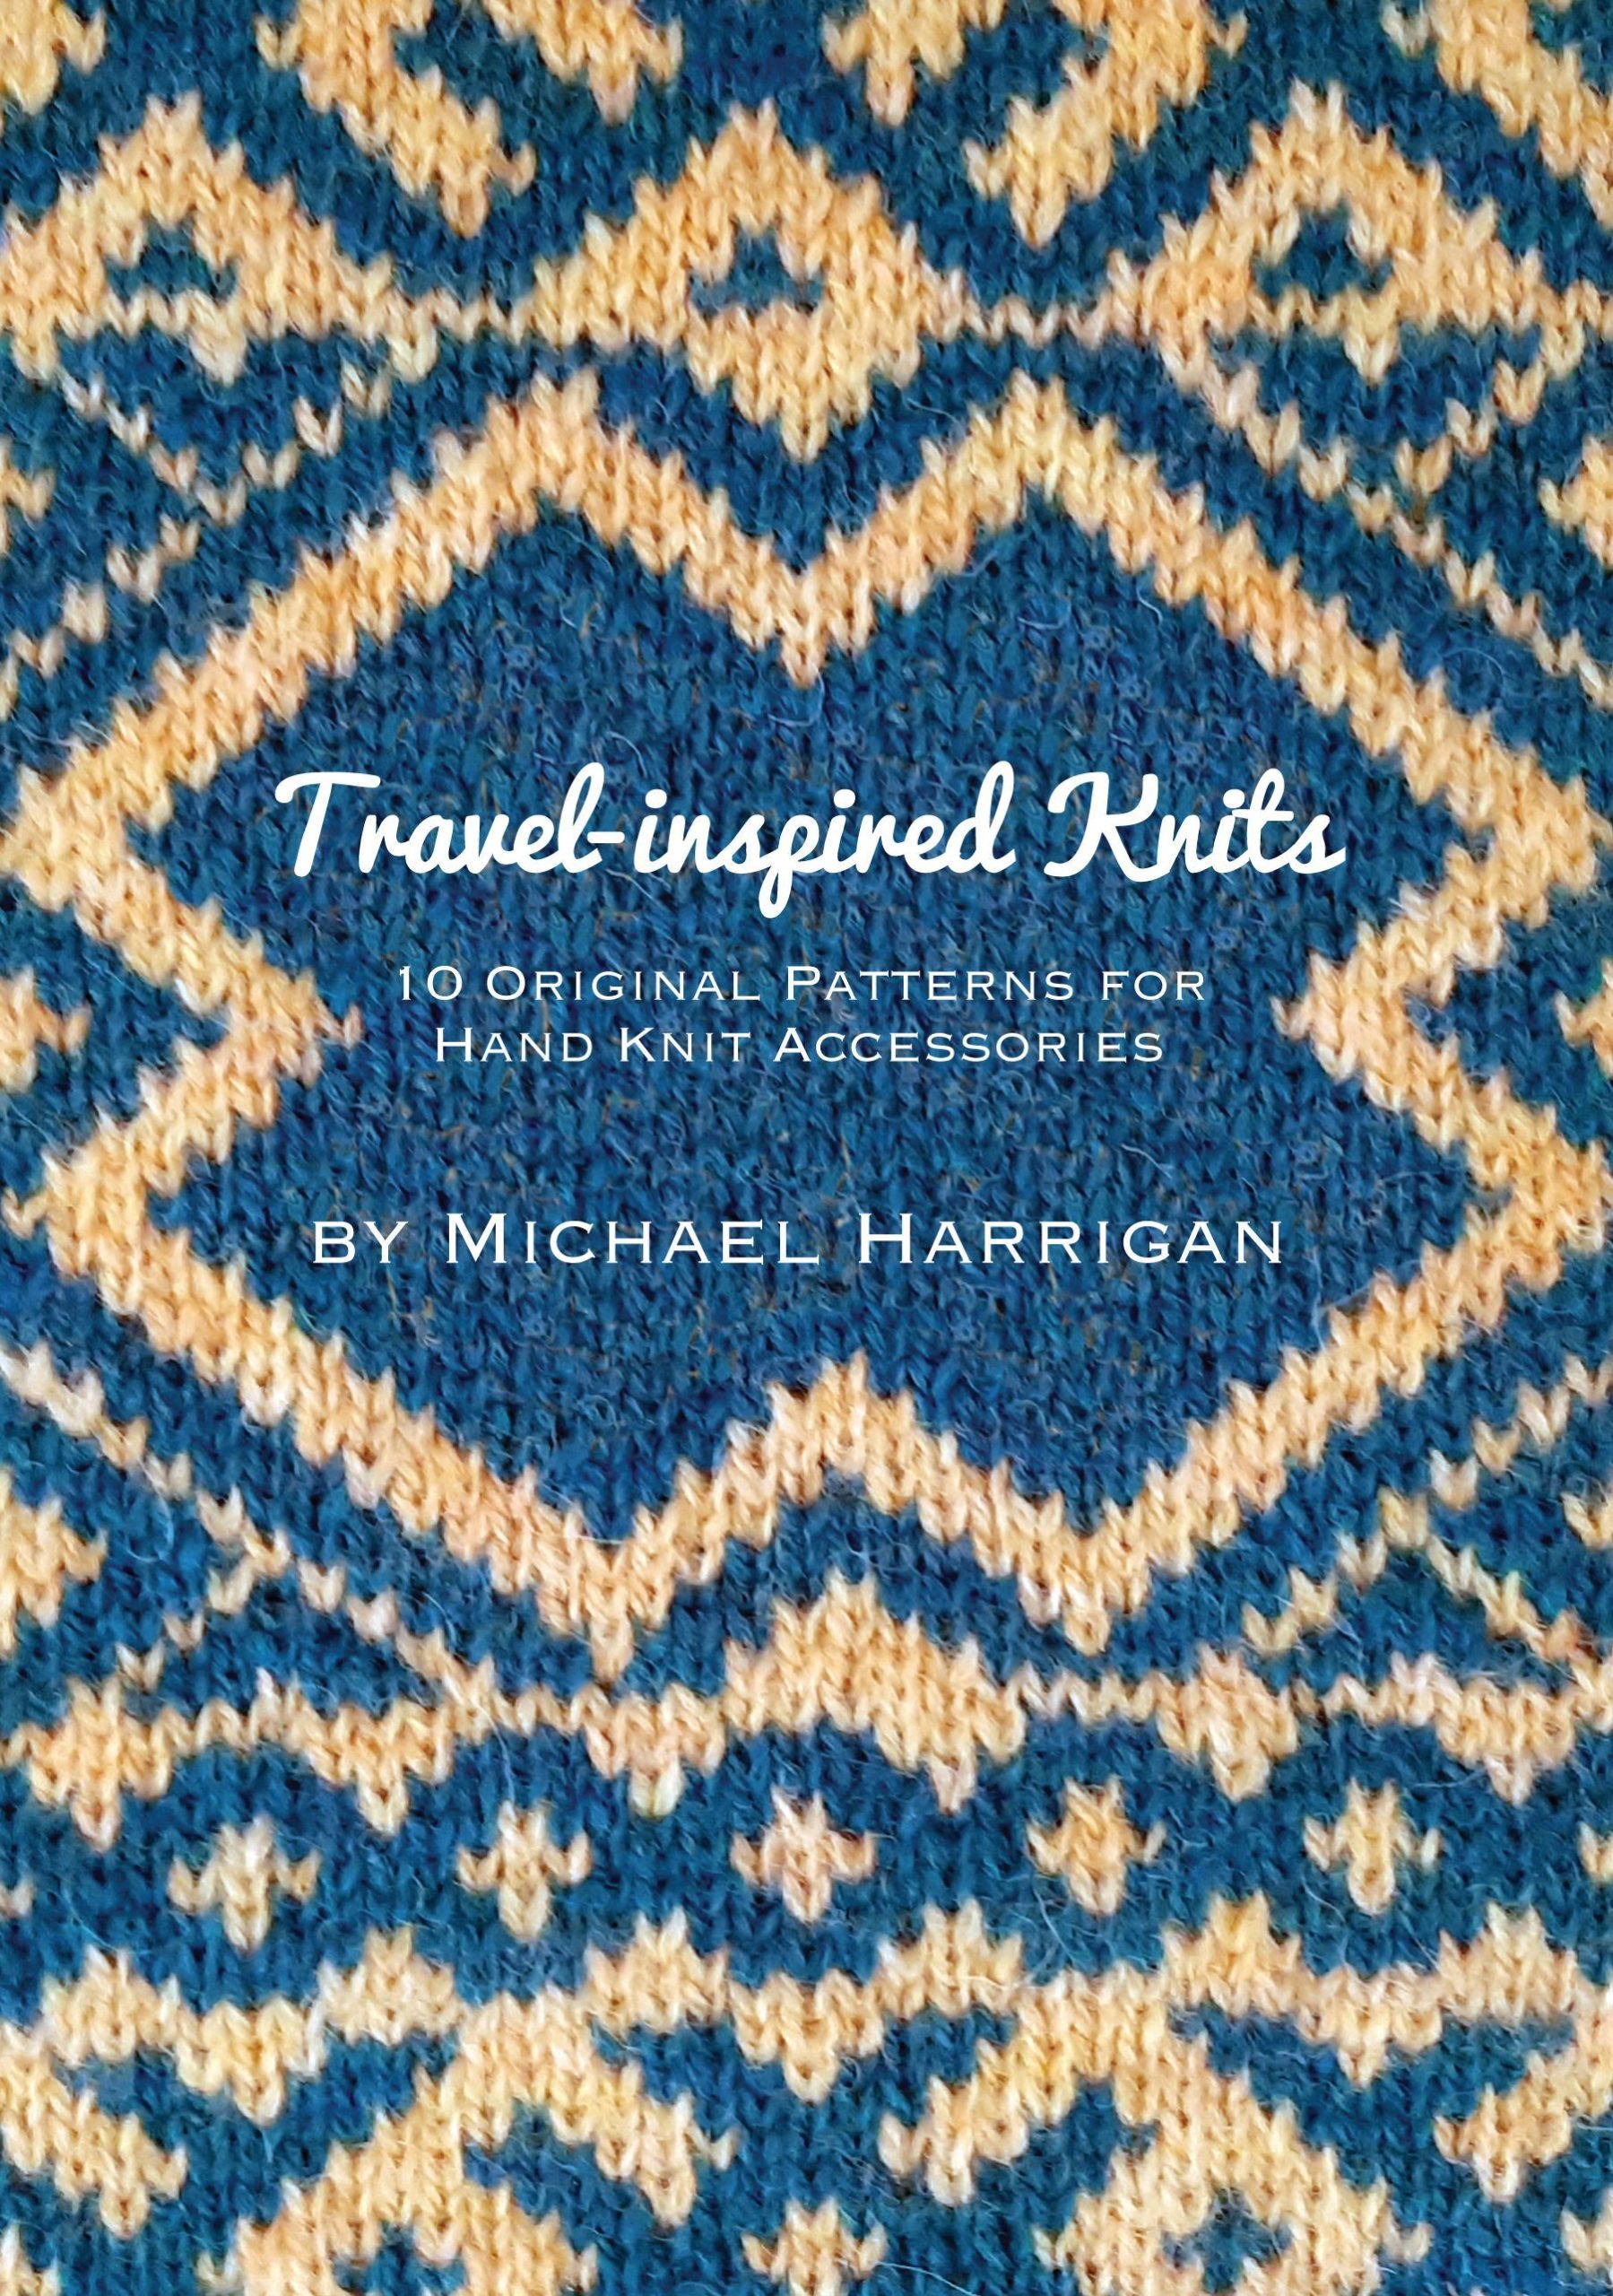 book of travels initial release date